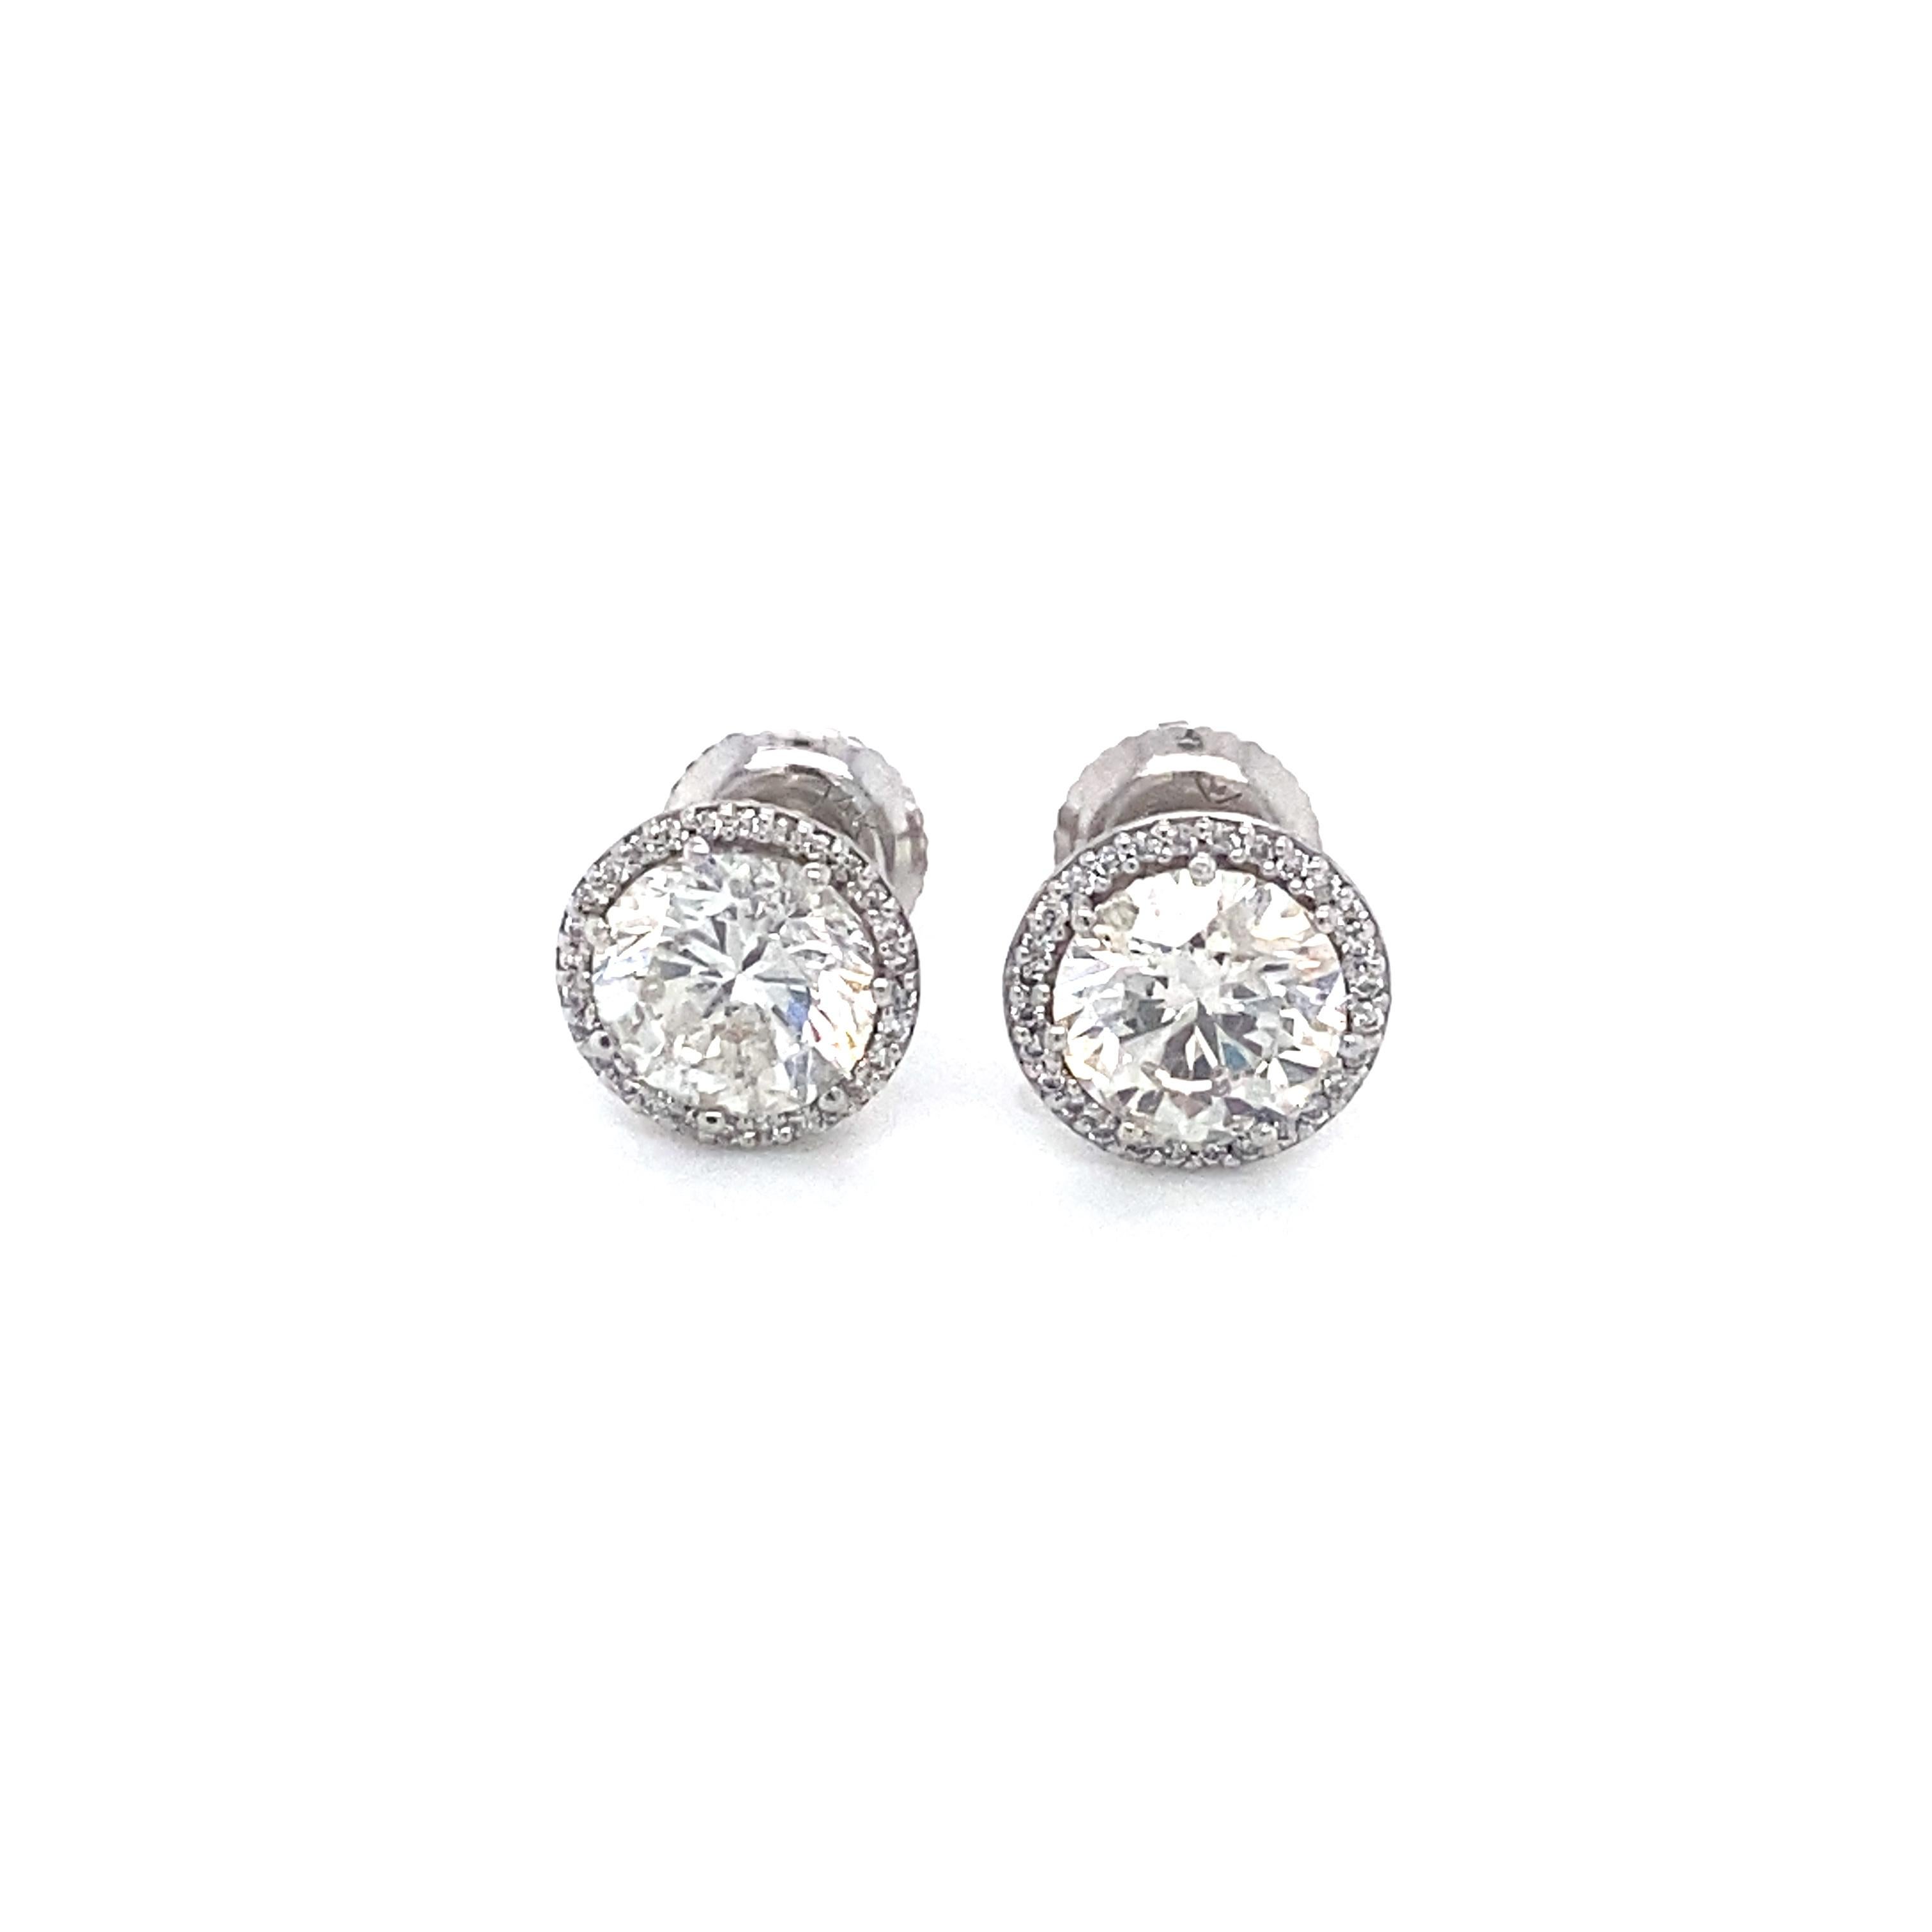 Item Details: These sparkling earrings have large round diamonds and accent detailing on the underside and have screw back closures.

Circa: 2000s
Metal Type: 14 Karat White Gold 
Weight: 1.7 grams 

Diamond Details:

Carat: 2.60 carat total weight